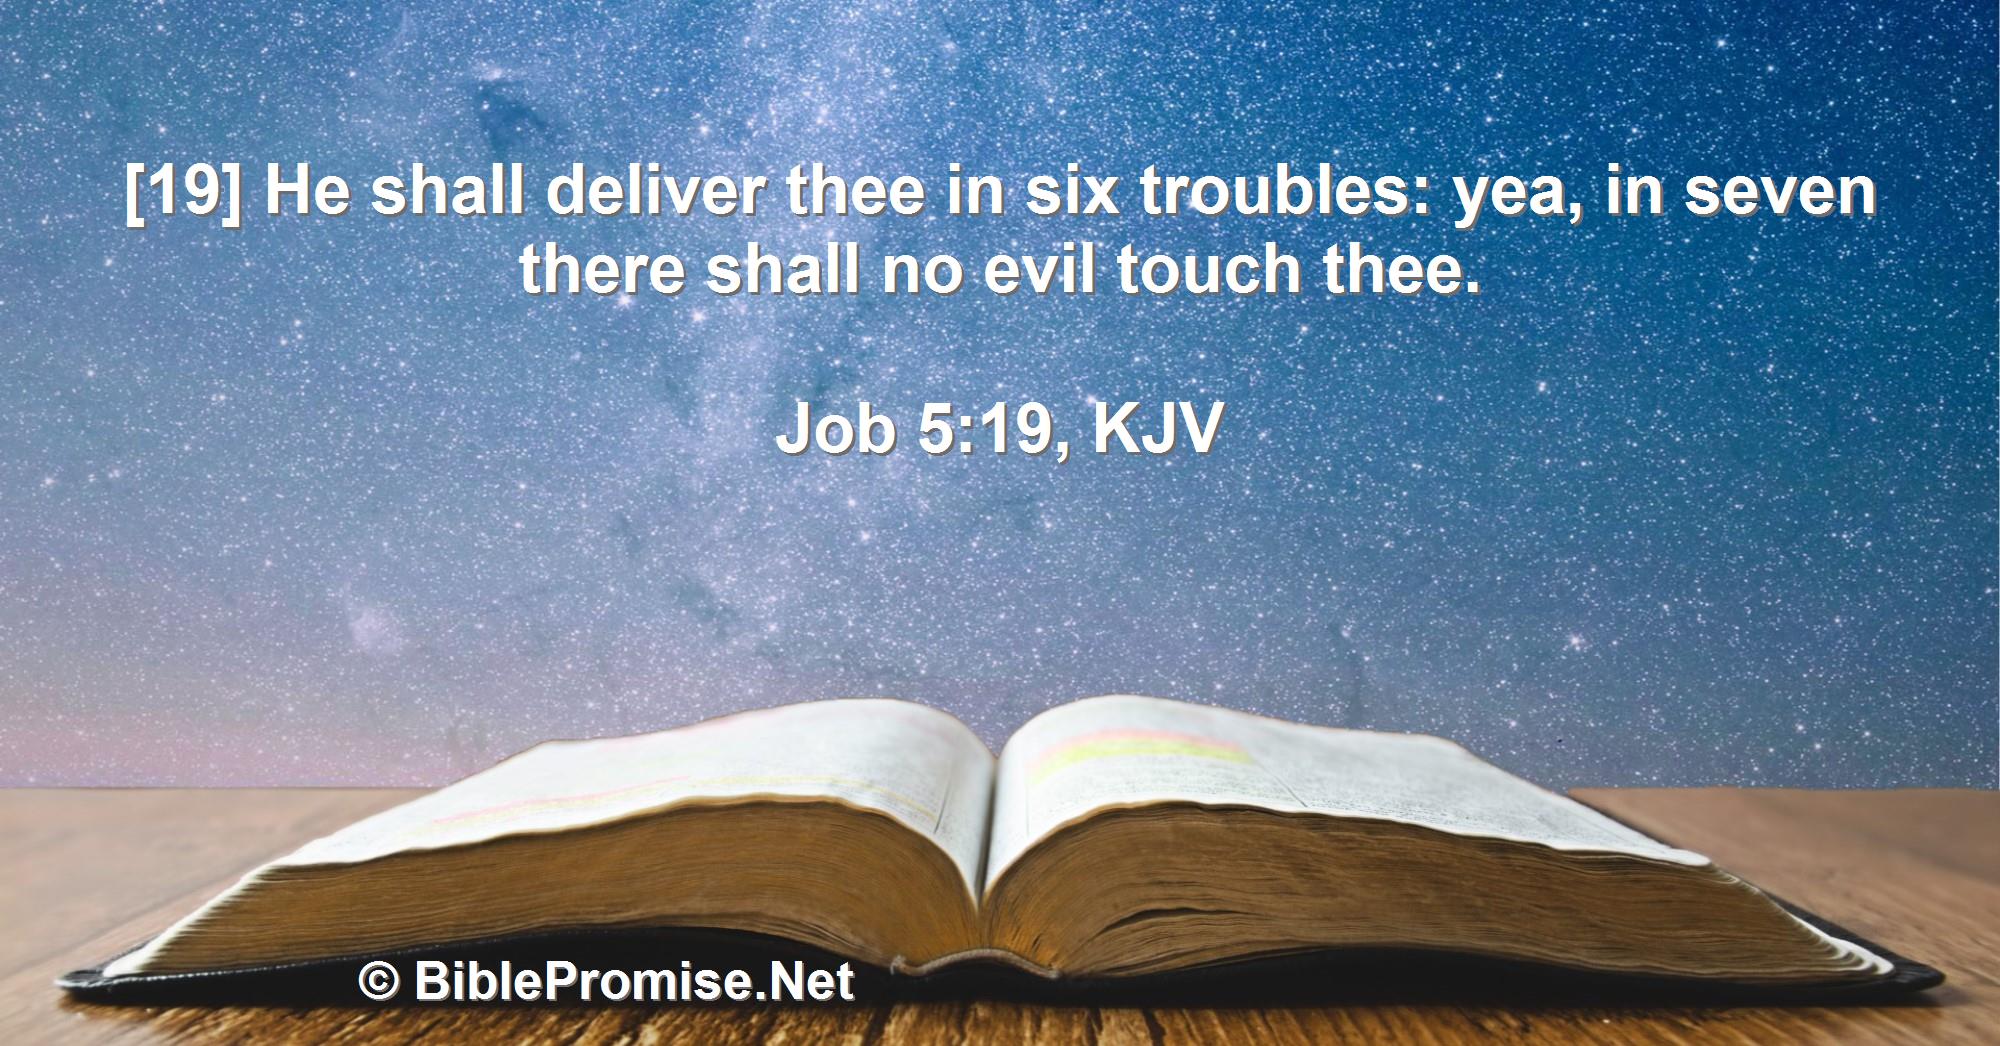 Saturday, June 10, 2023 - Job 5:19 (KJV) - Bible promise that God will save you from trouble.